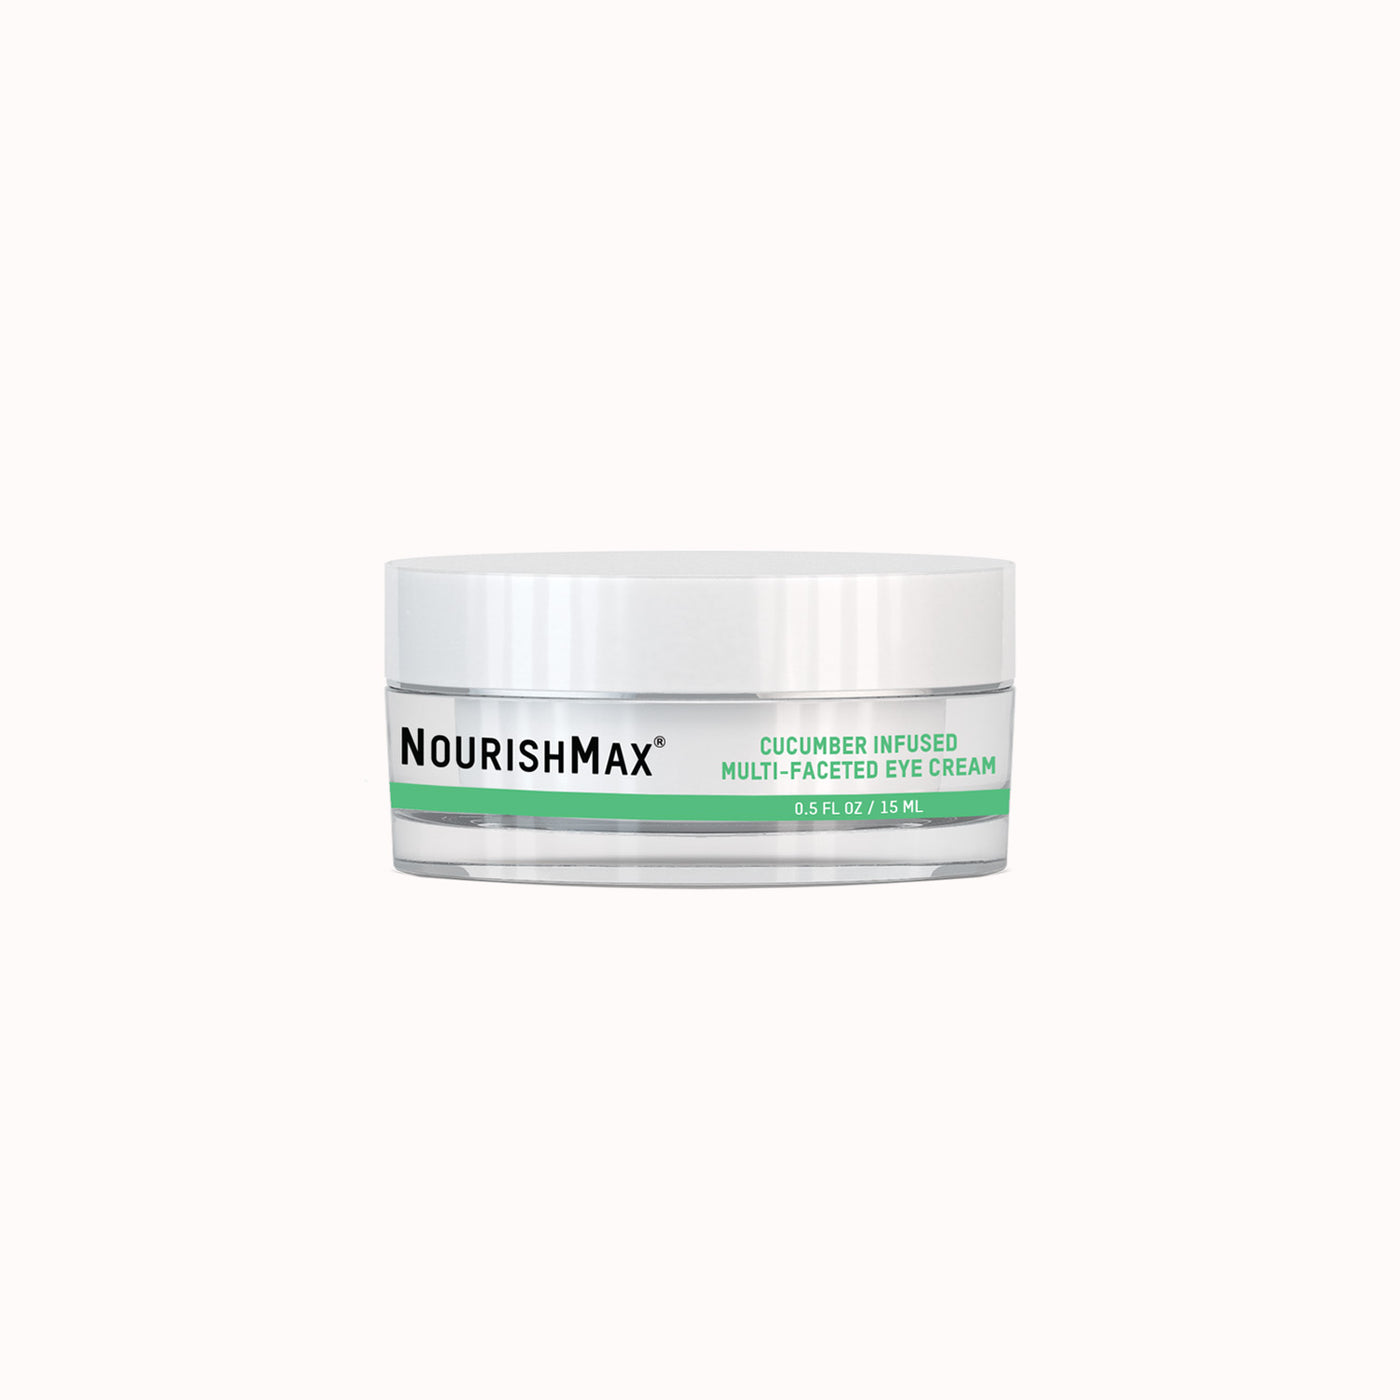 Cucumber Infused Multi-Faceted Eye Cream